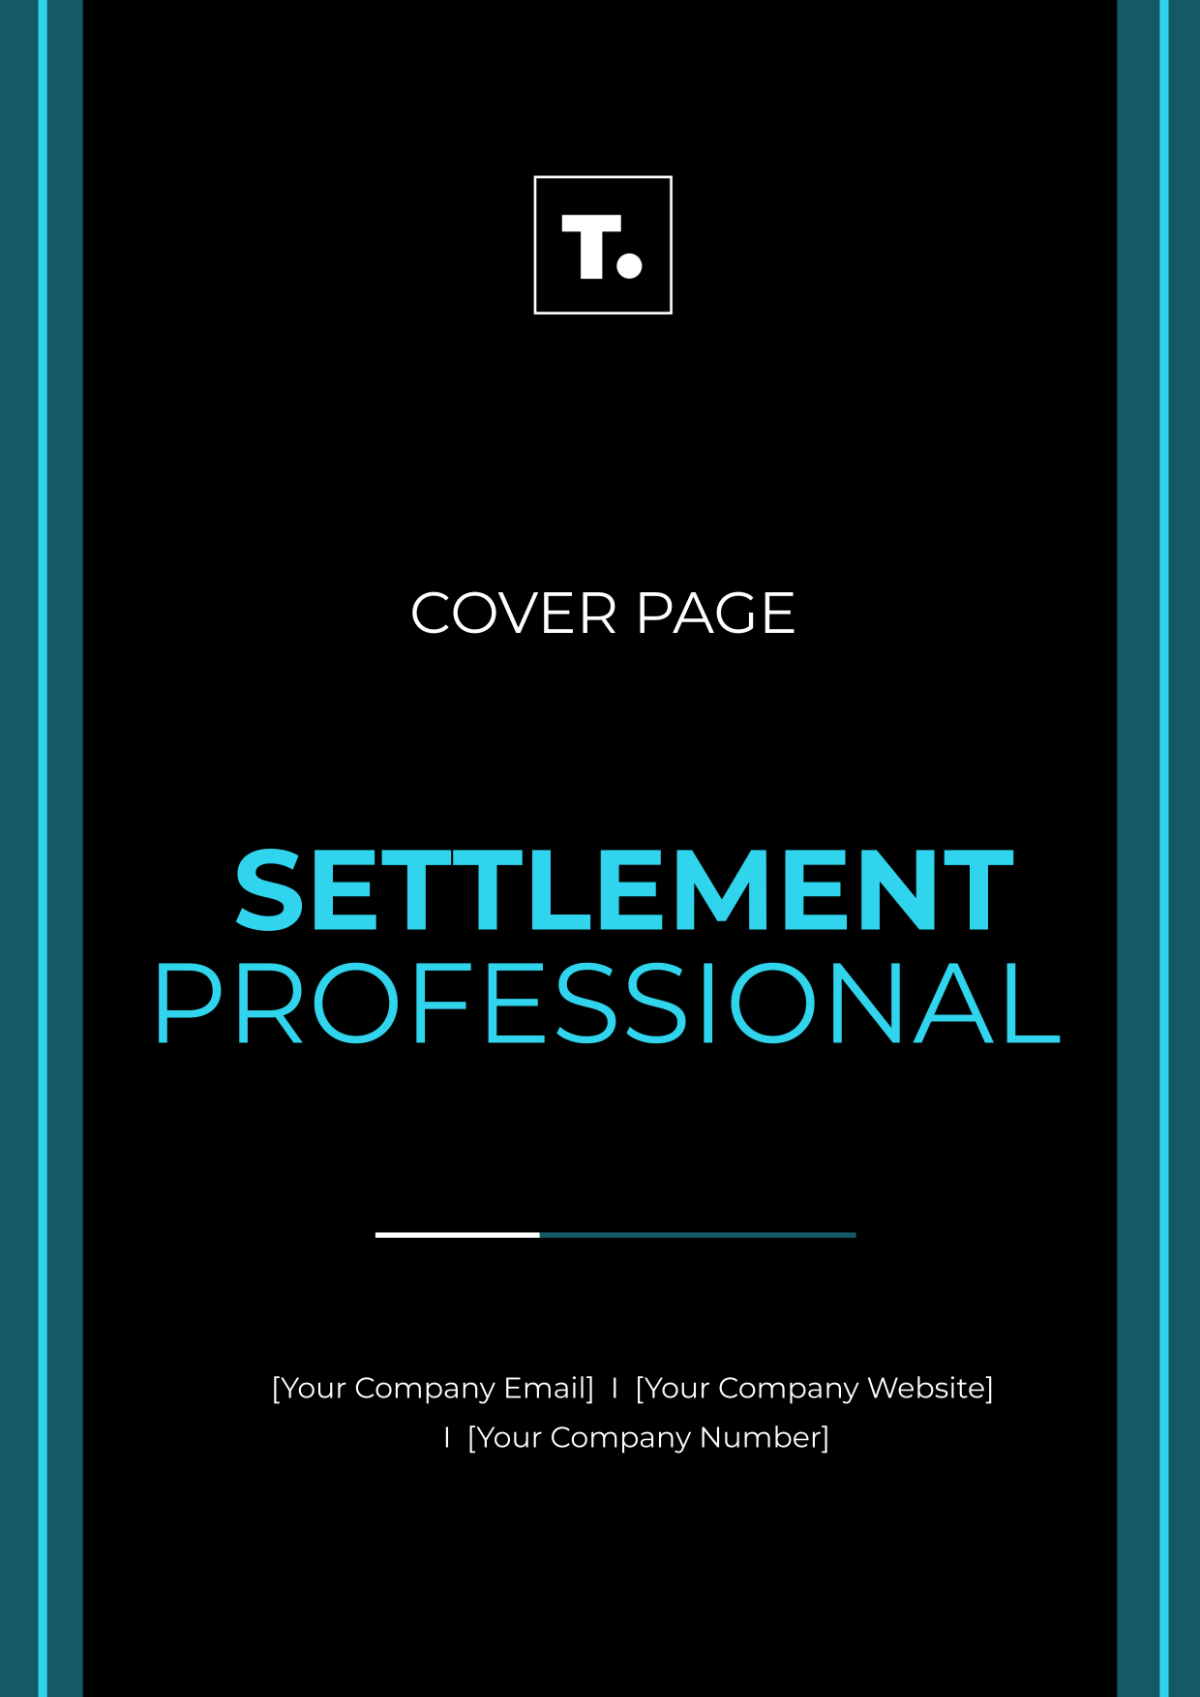 Settlement Professional Cover Page